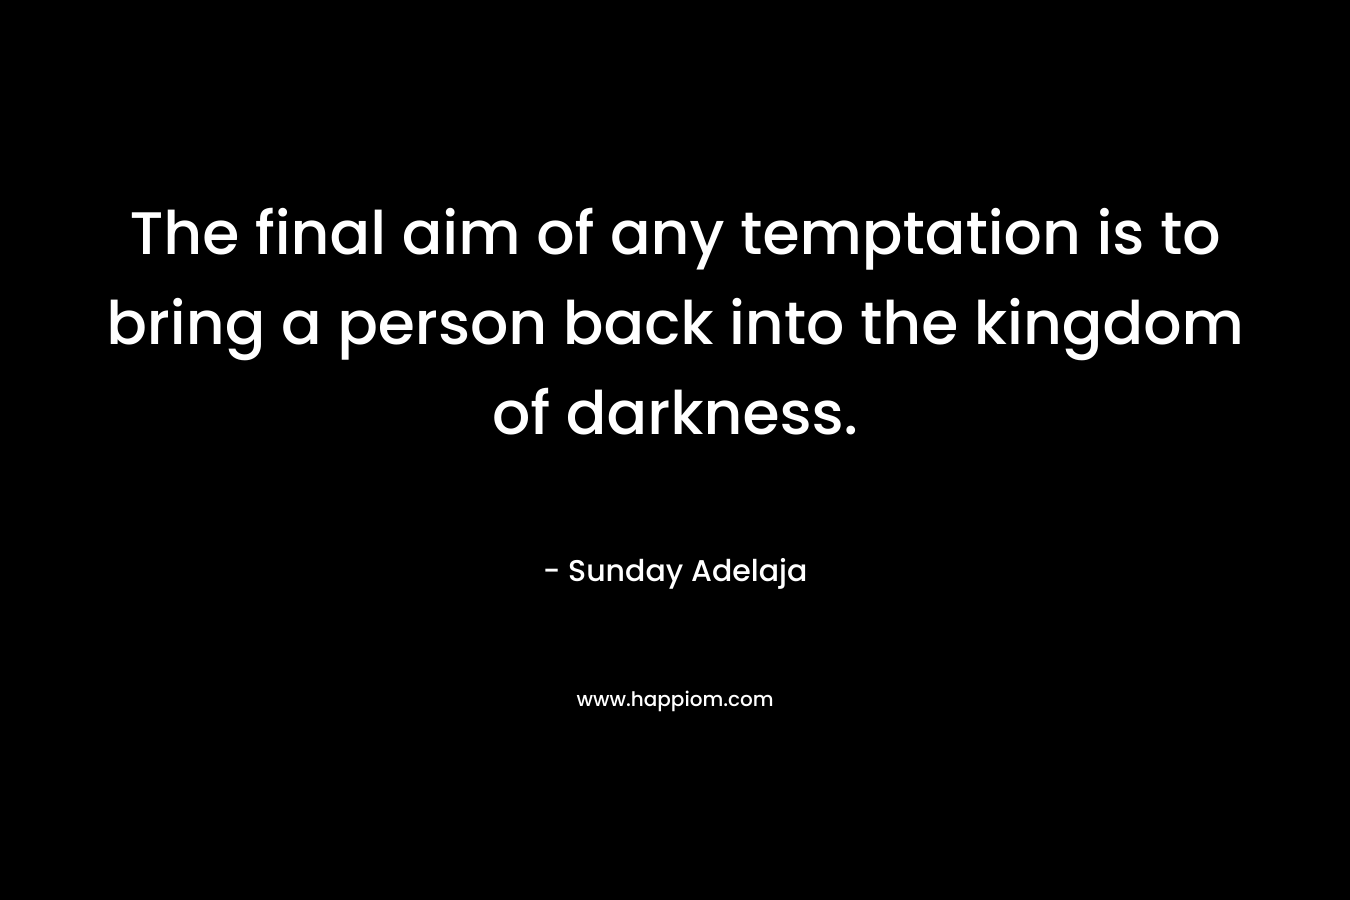 The final aim of any temptation is to bring a person back into the kingdom of darkness.